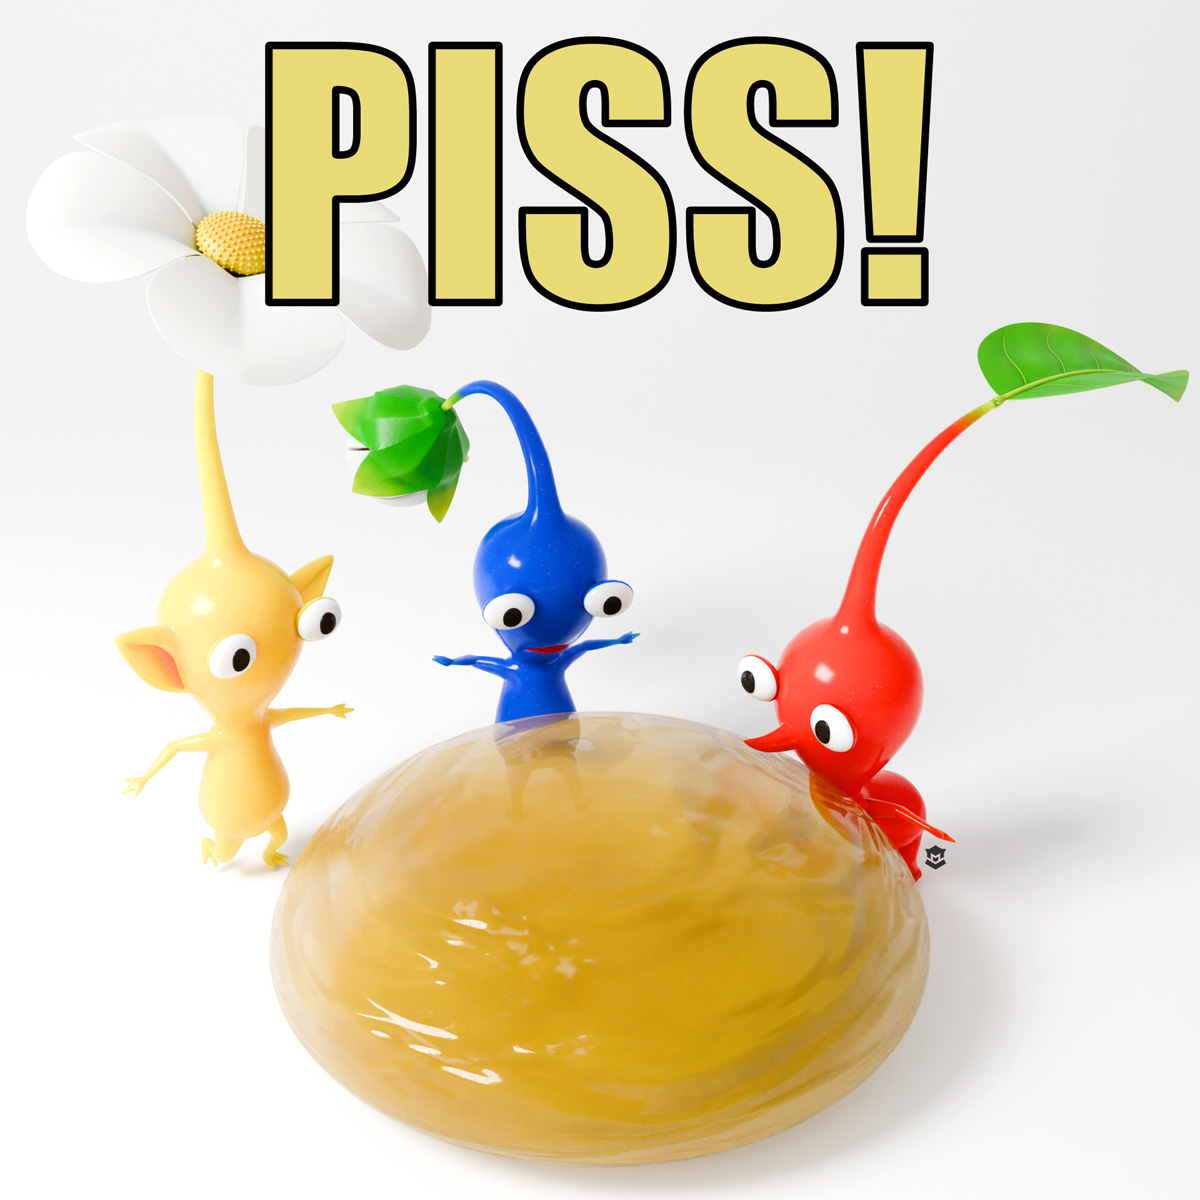 RT @iammarcpi: The fact that I made high-quality Pikmin models means that I can use them for things like this. https://t.co/XWDHZ5we2g